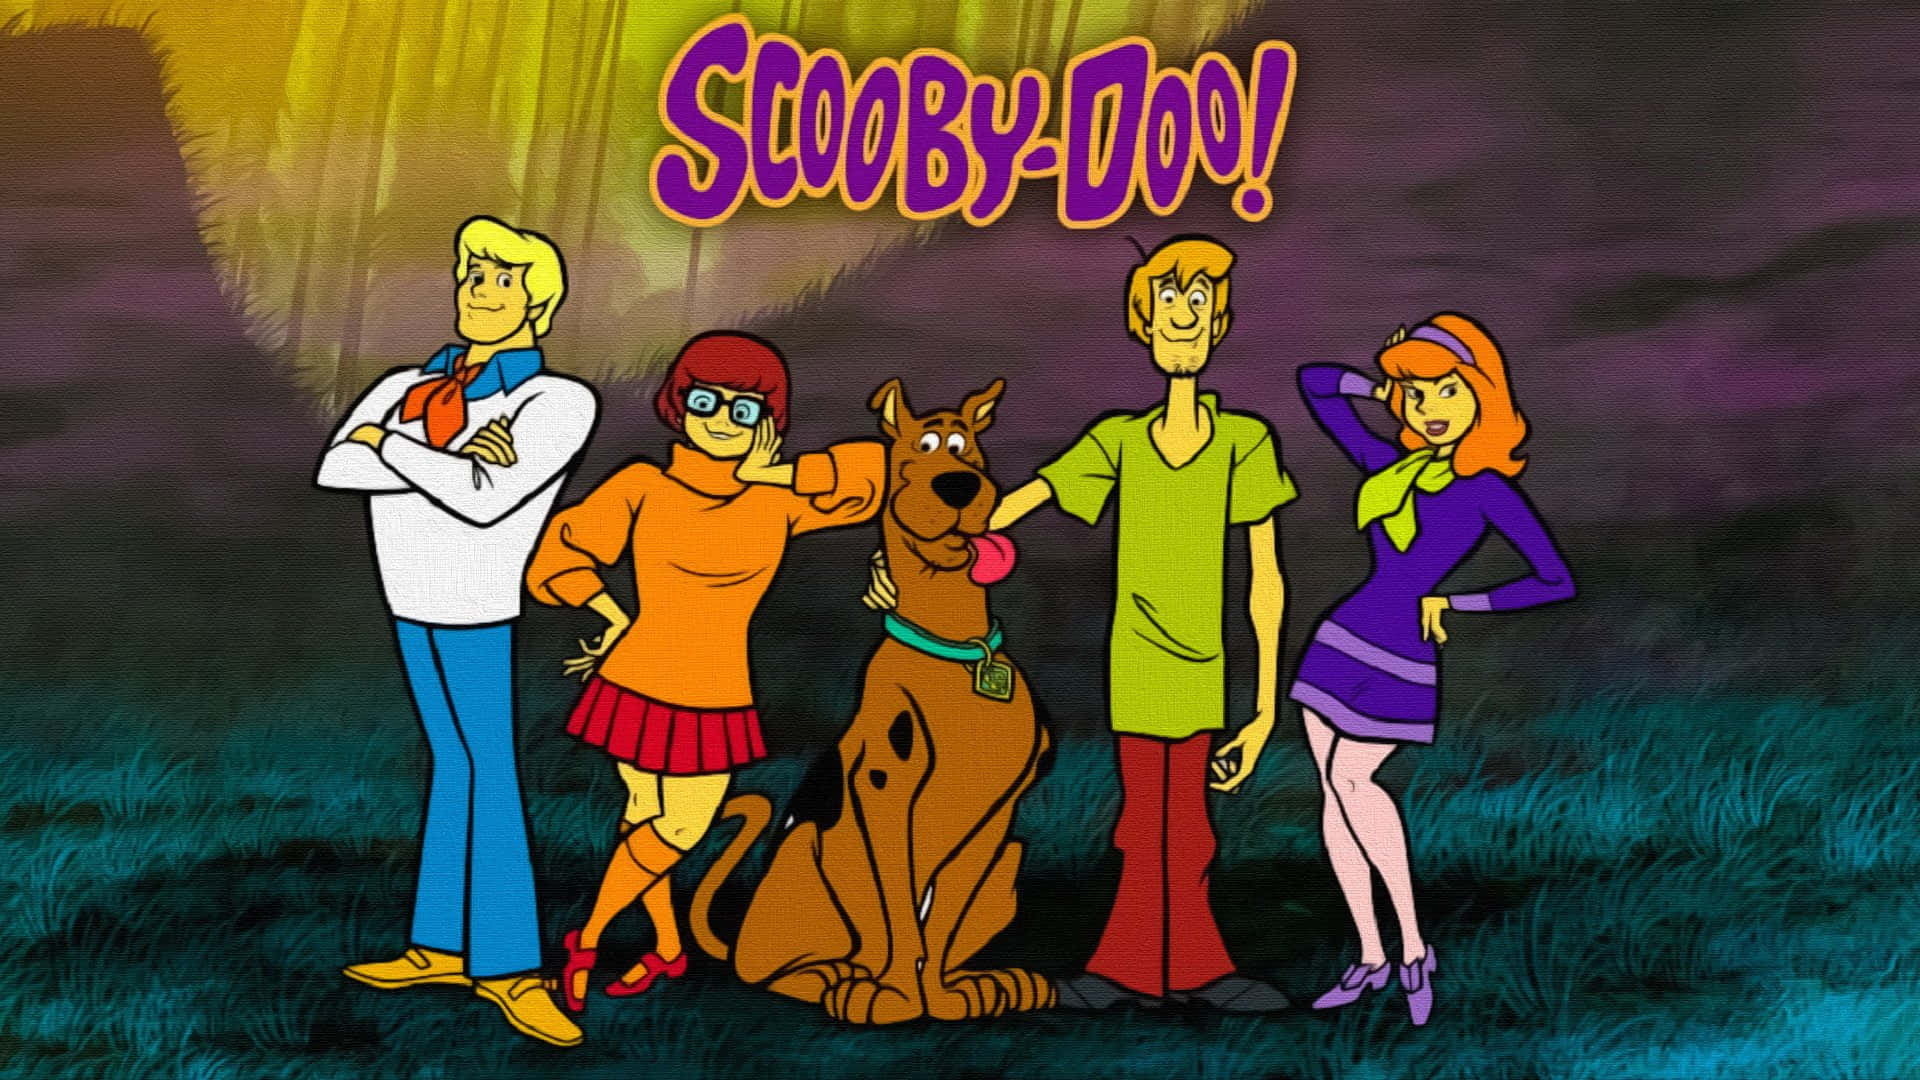 Join Scooby Doo in his A-Mazing Adventures!